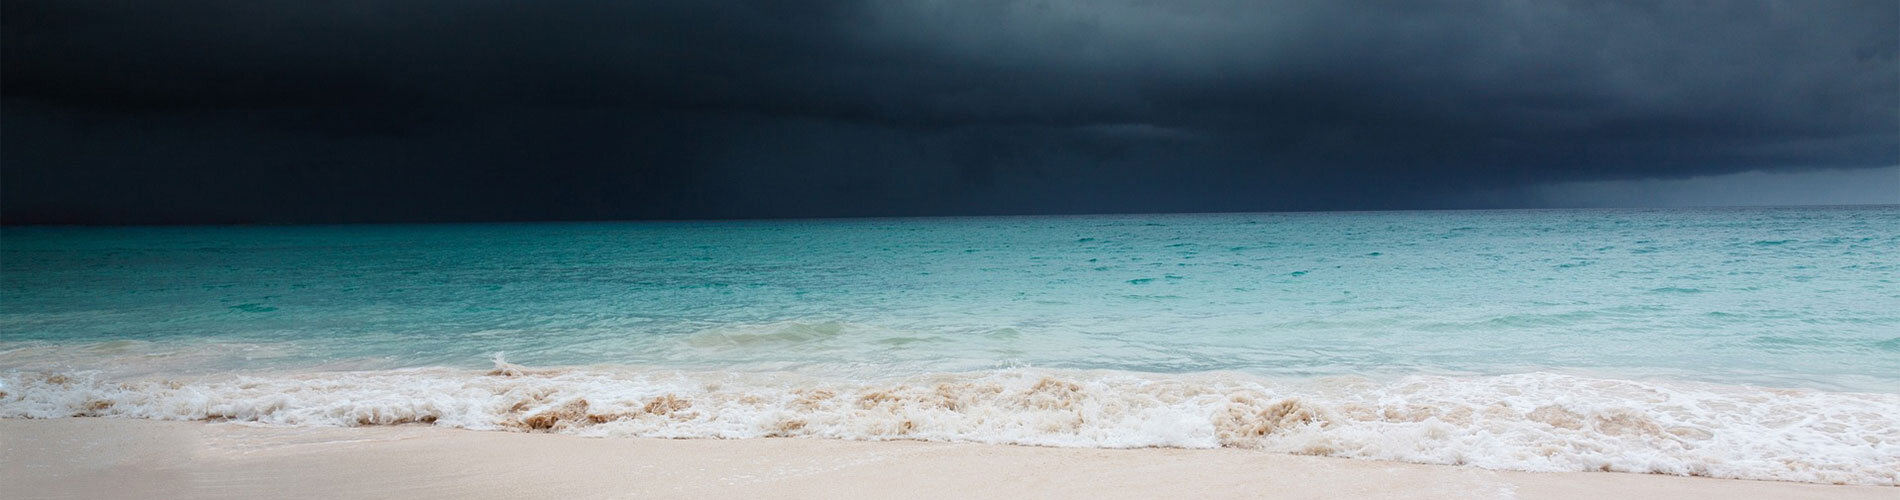 A hurricane looming in the distance over a beach.